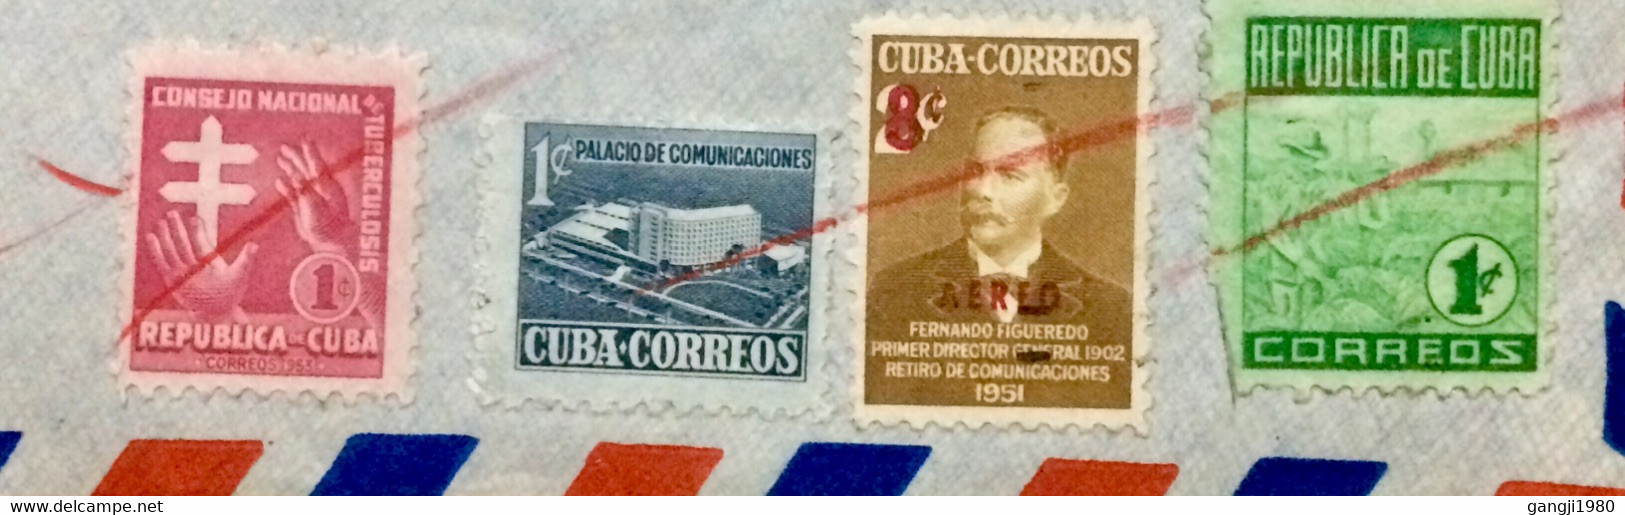 CUBA 1952, COVER USED TO USA, F.FIGUEREDO STAMP OVPTD, POST BUILDING, TOBACCO, TUBERCULOSIS, NEW YORK, OLD CHELSEA STATI - Cartas & Documentos